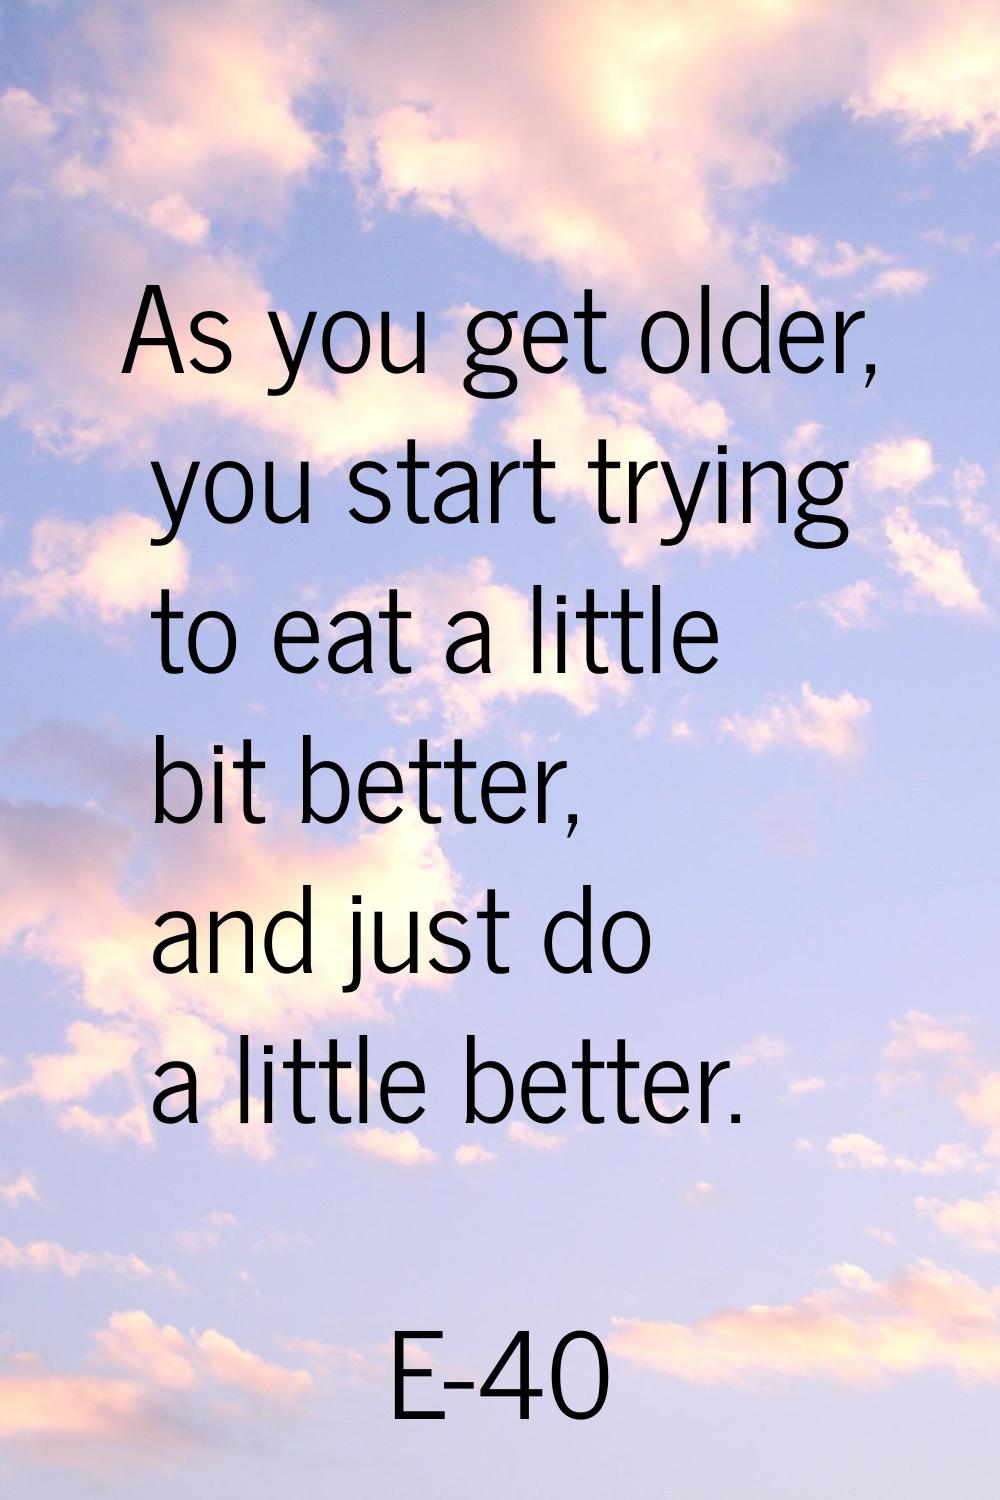 As you get older, you start trying to eat a little bit better, and just do a little better.